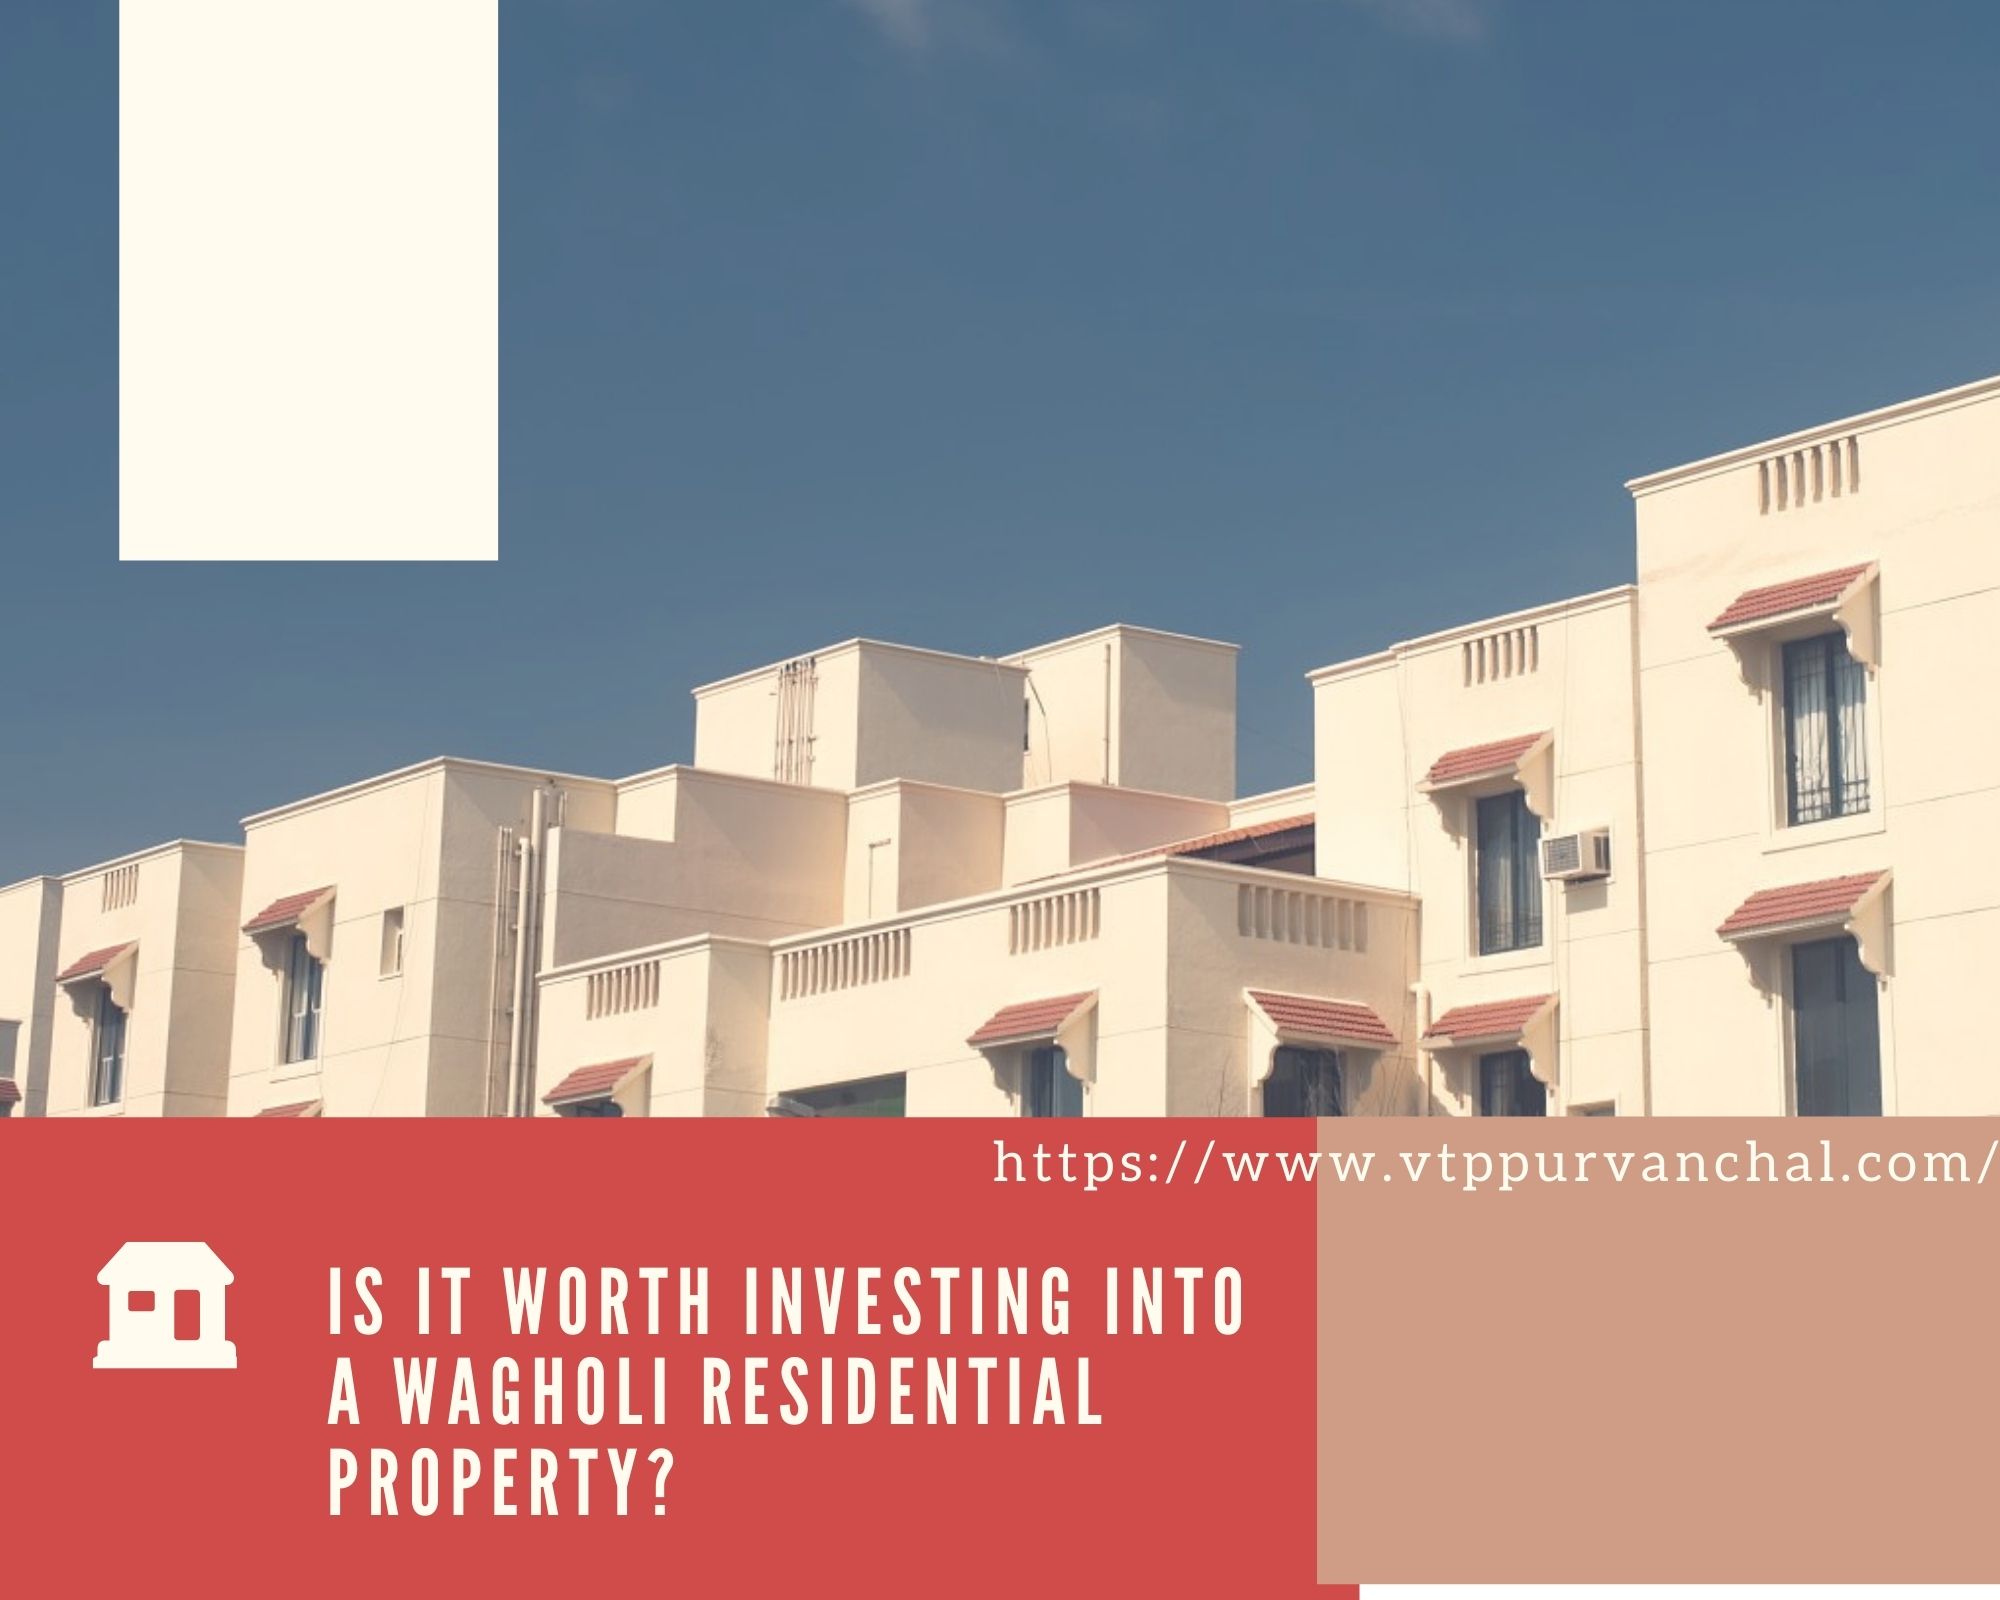 Is it worth investing into a Wagholi residential property?